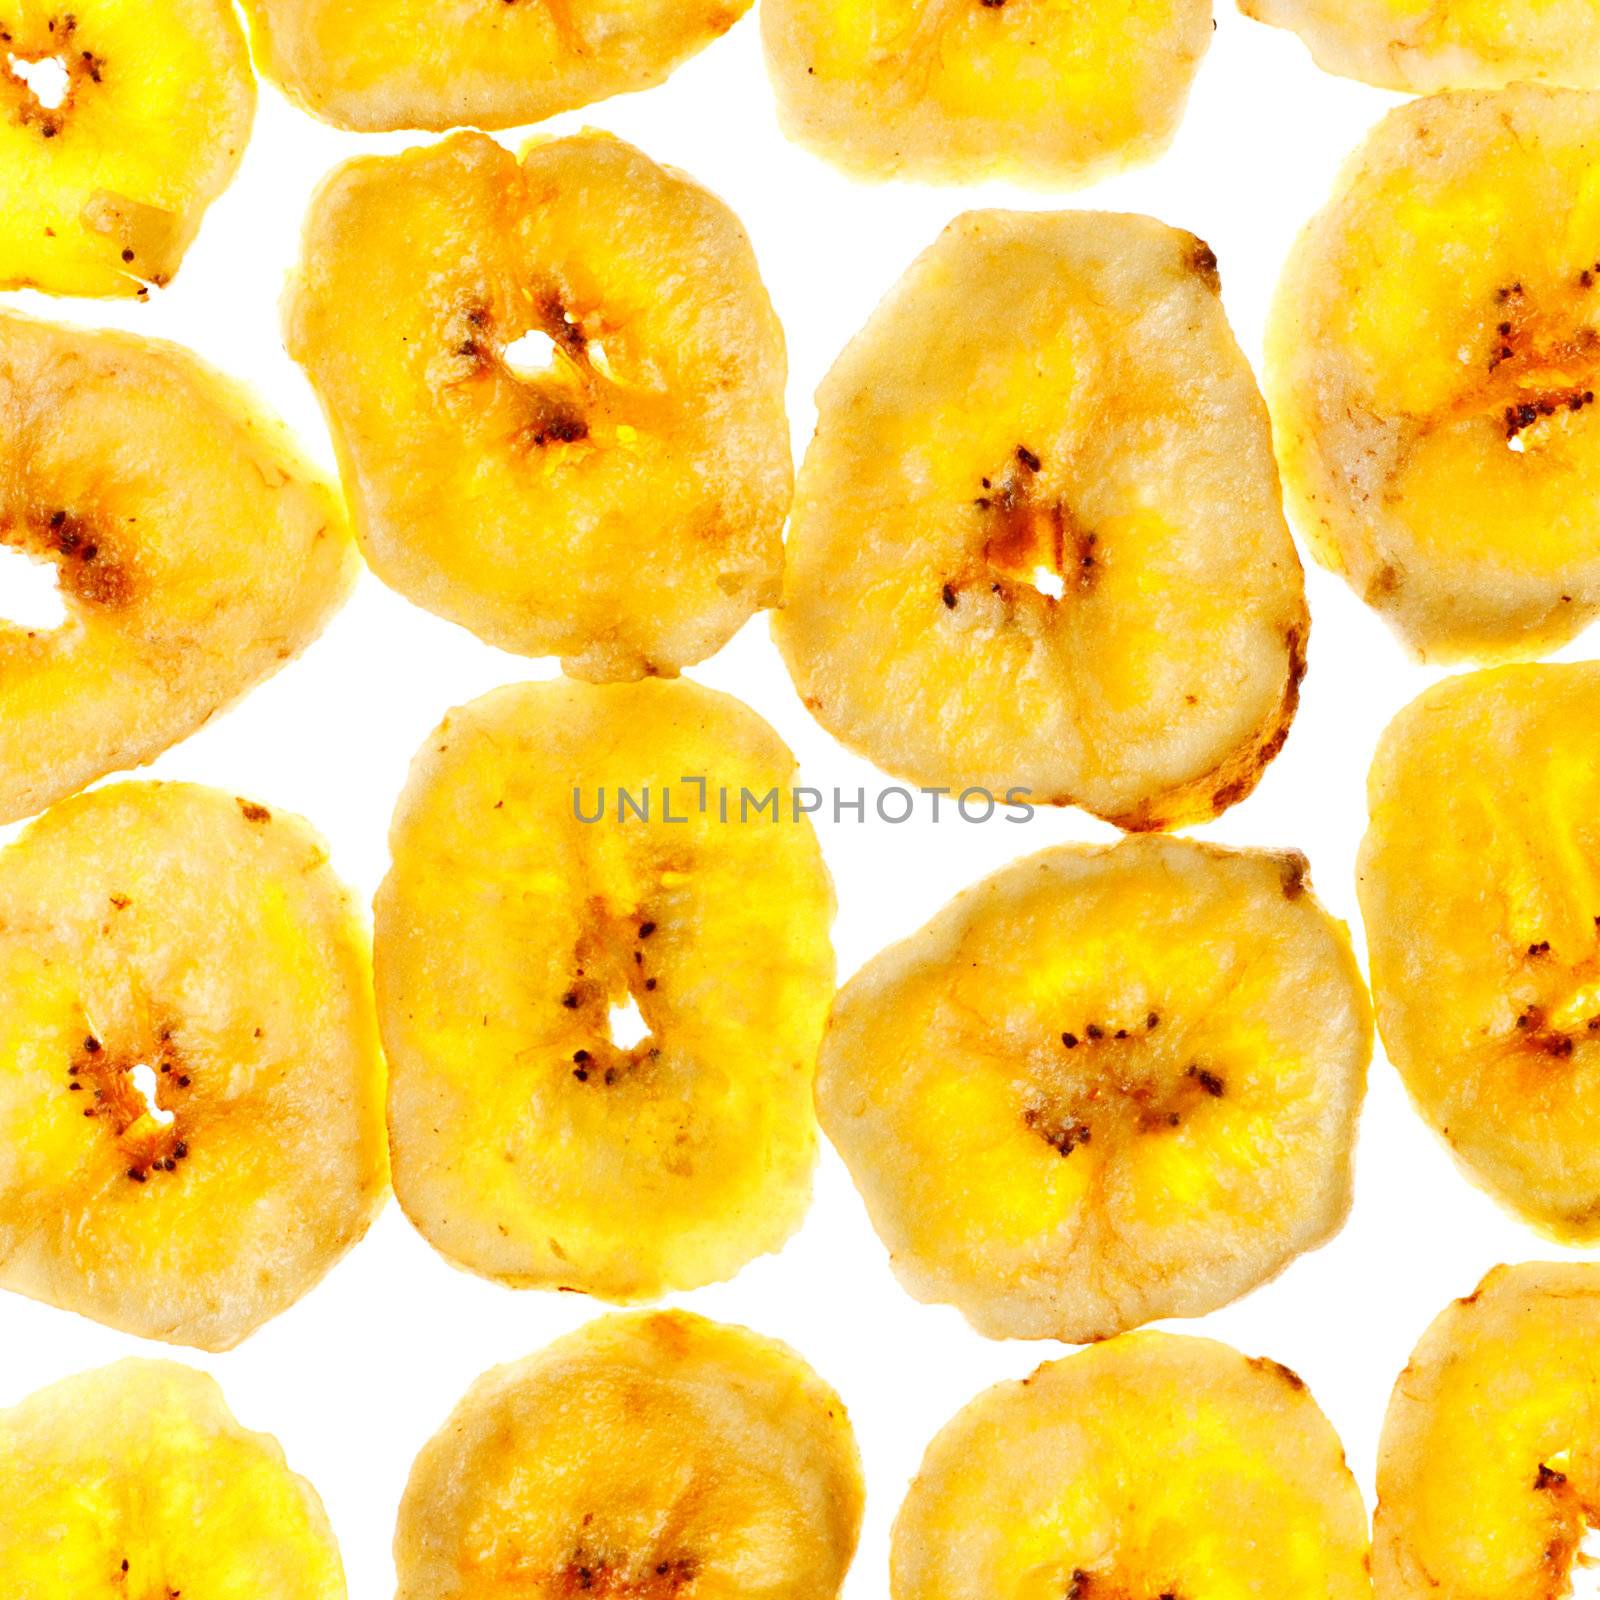 dried banana yellow sliced chips, square background